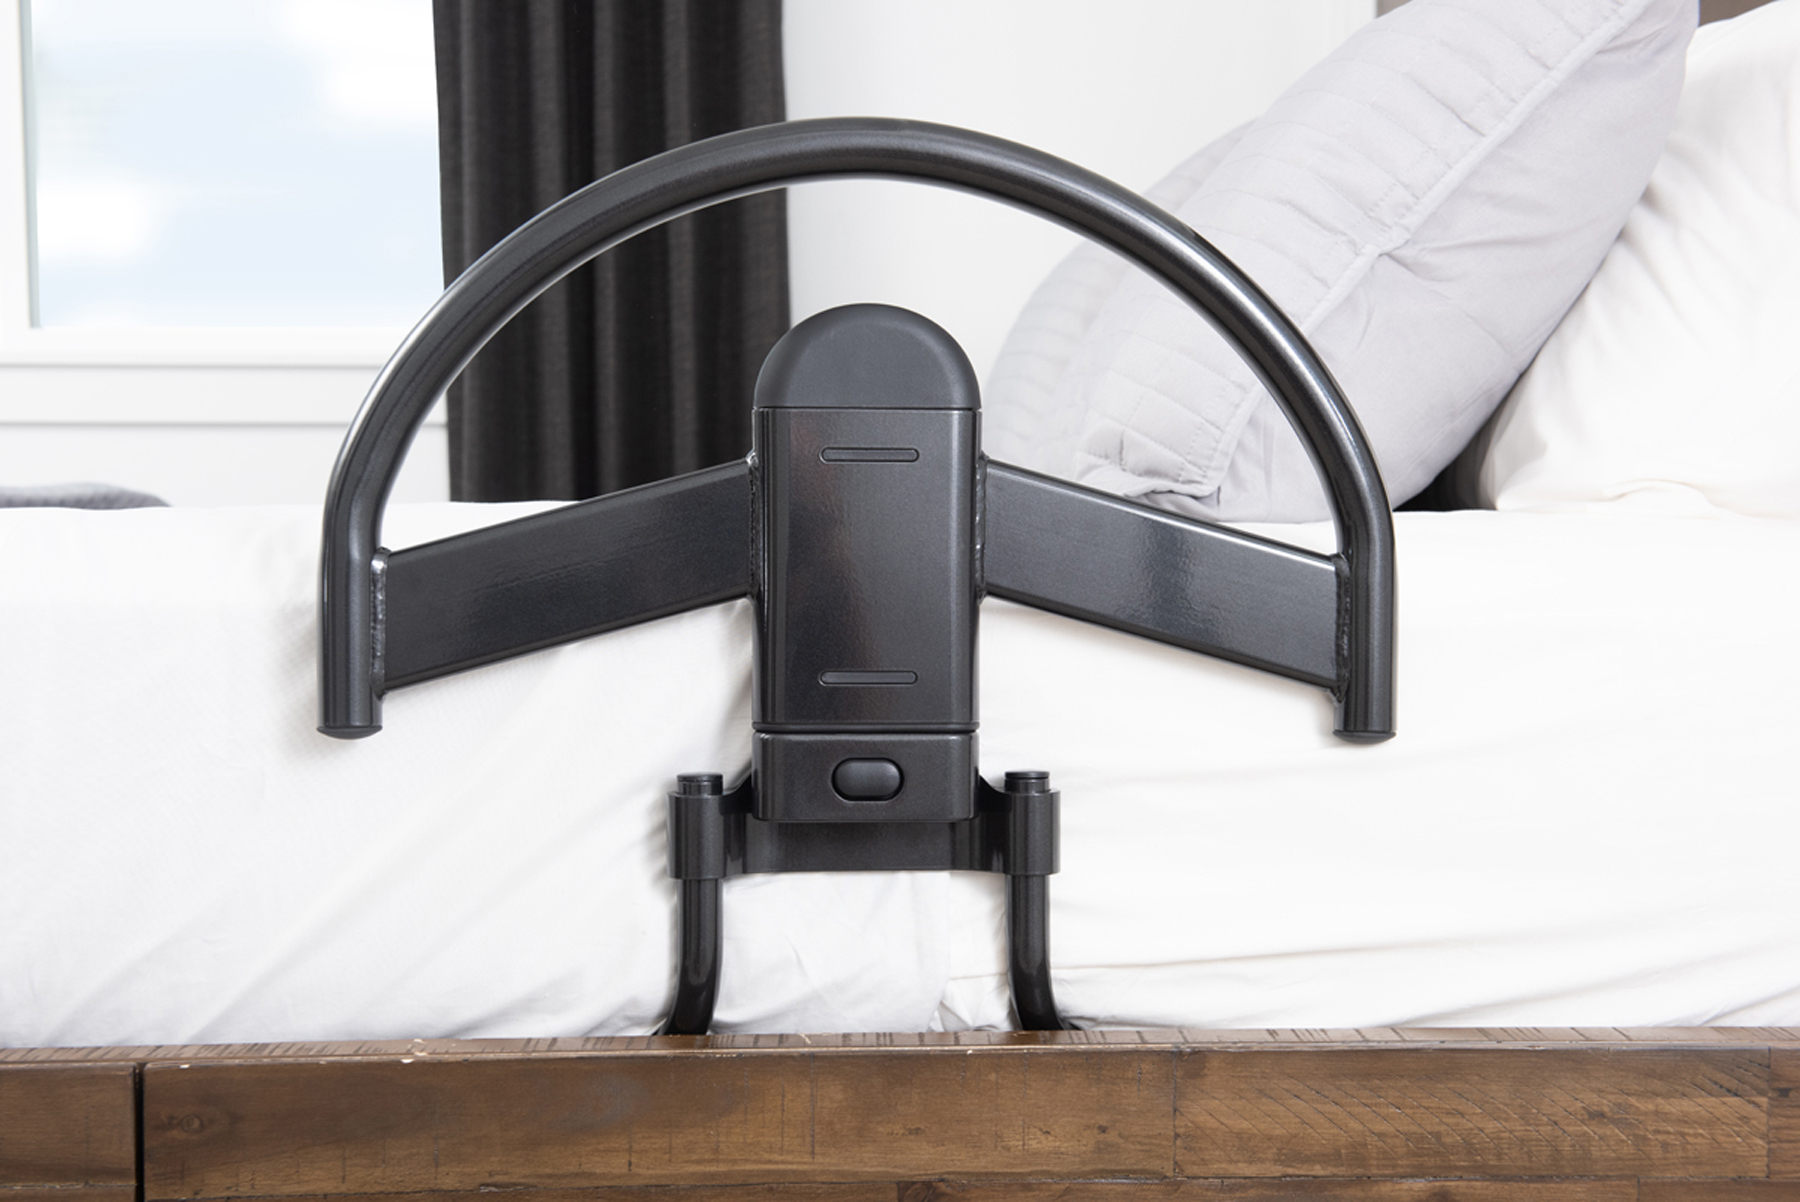 Bedside Extend-A-Rail - Able Life Solutions